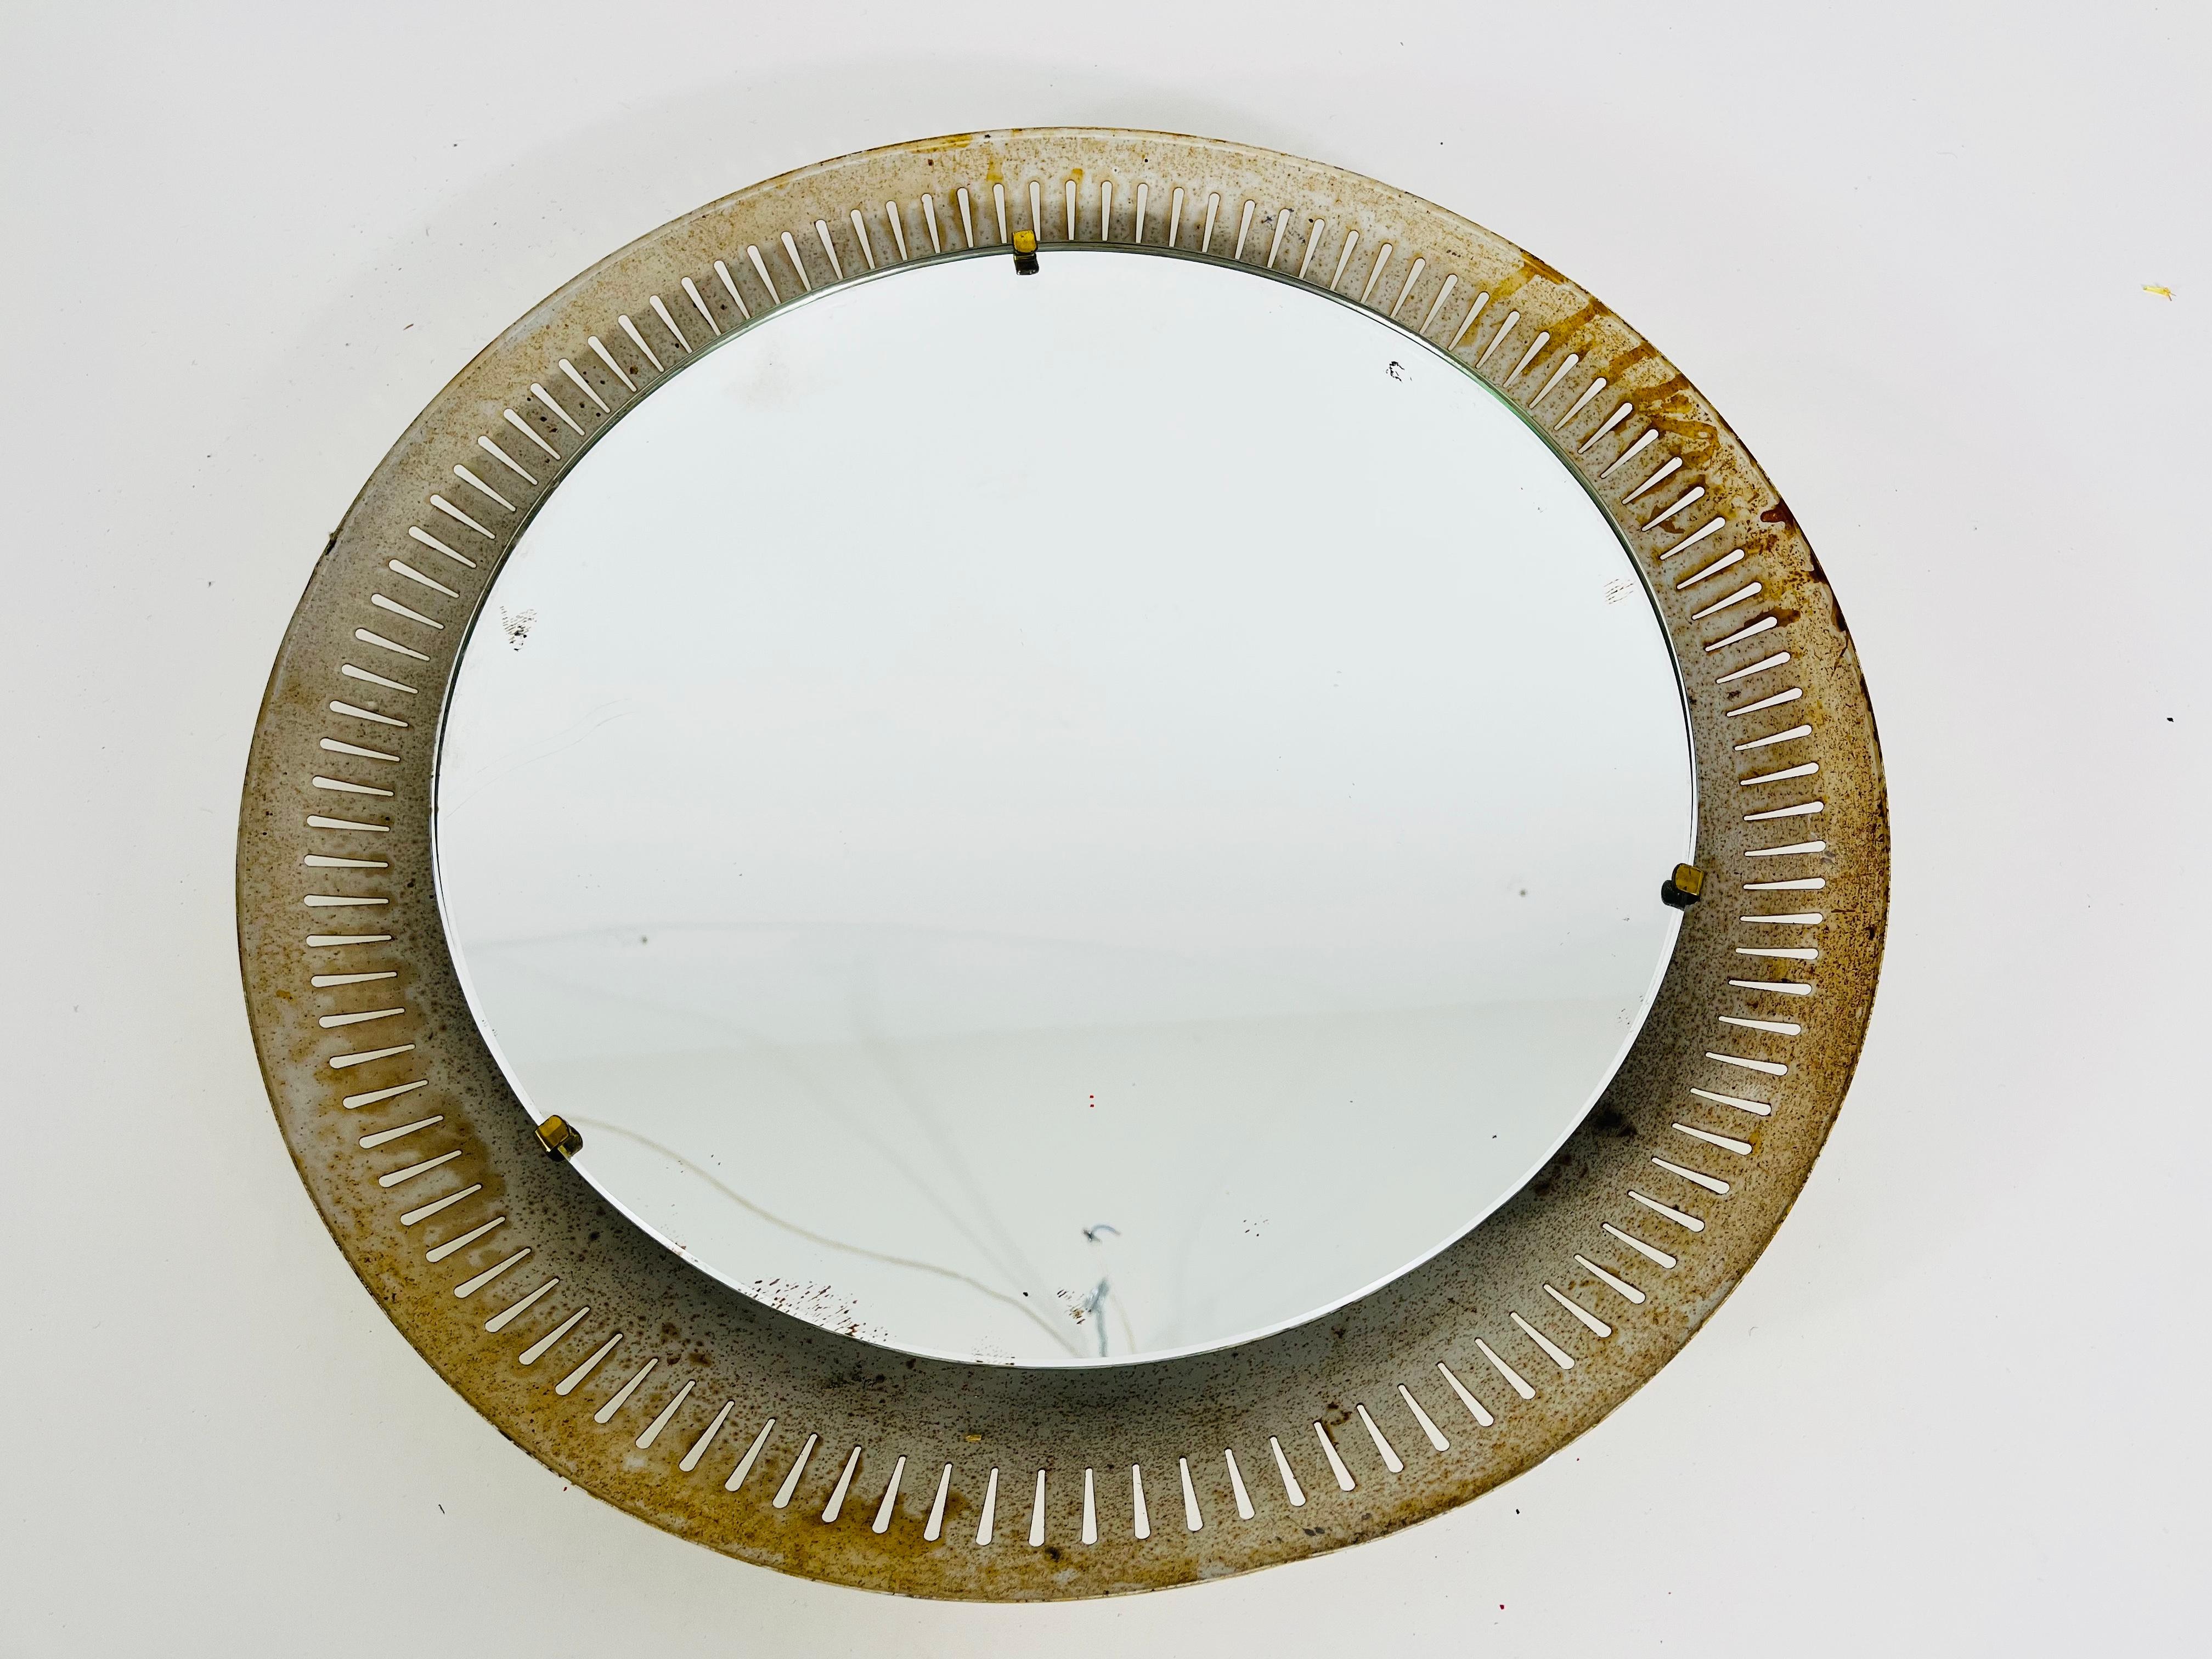 A Hillebrand illuminated wall mirror from the 1950s made in Germany. The mirror has a round metal design. There are E14 light bulbs inside the frame. Brass screws which secure the glass to the aluminium frame. 

The mirror is in a very used